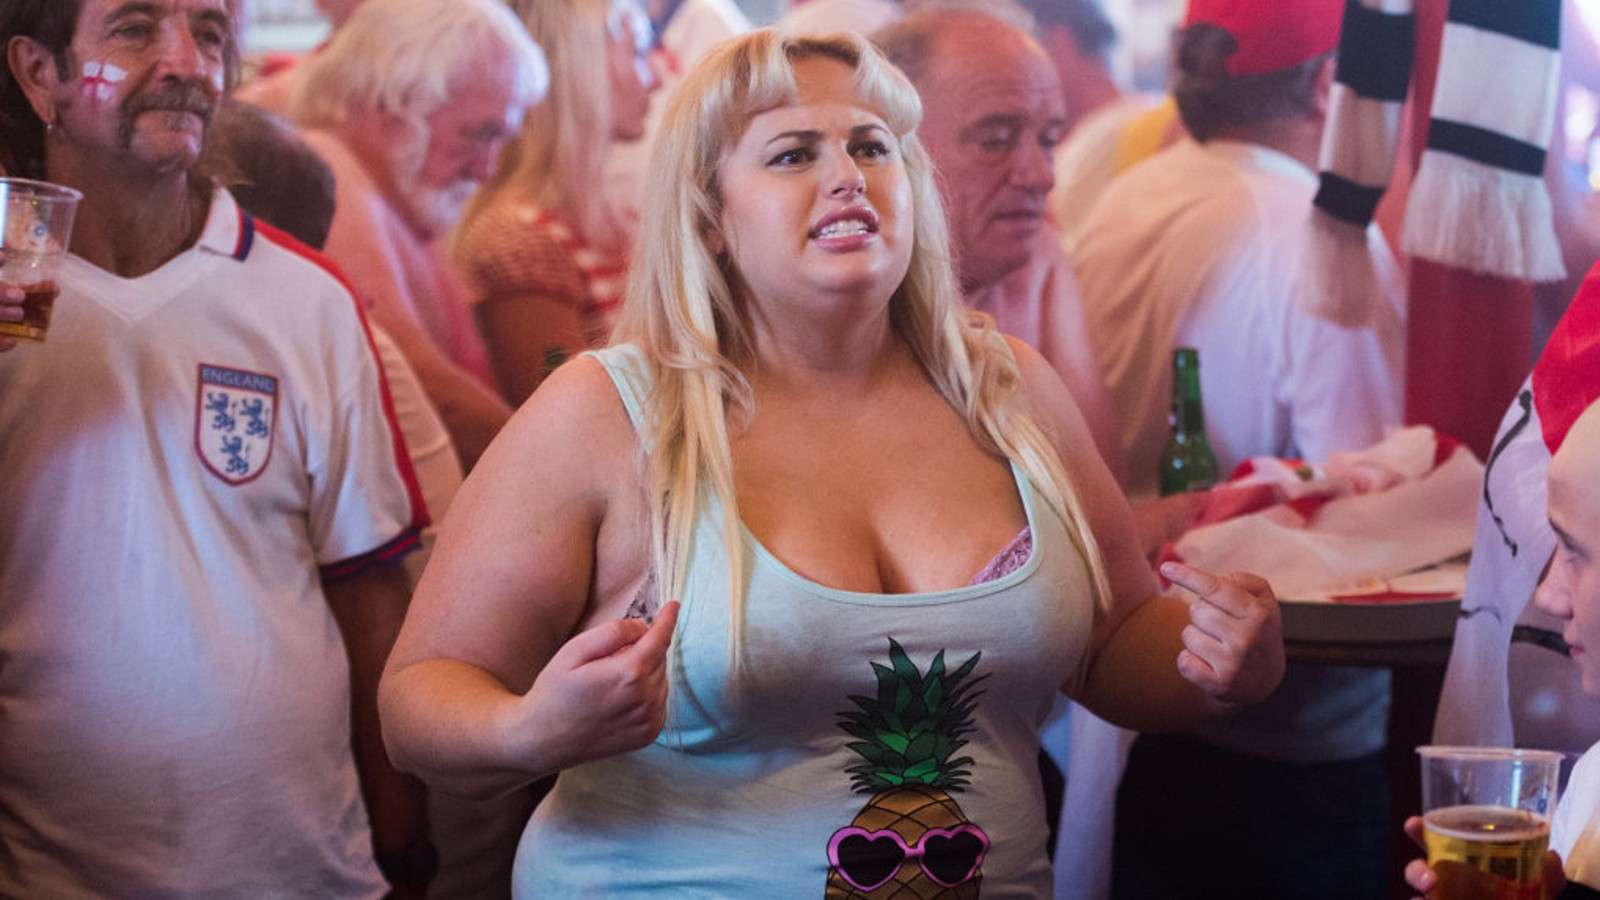 Rebel Wilson watching a football match in a bar in Grimsby.